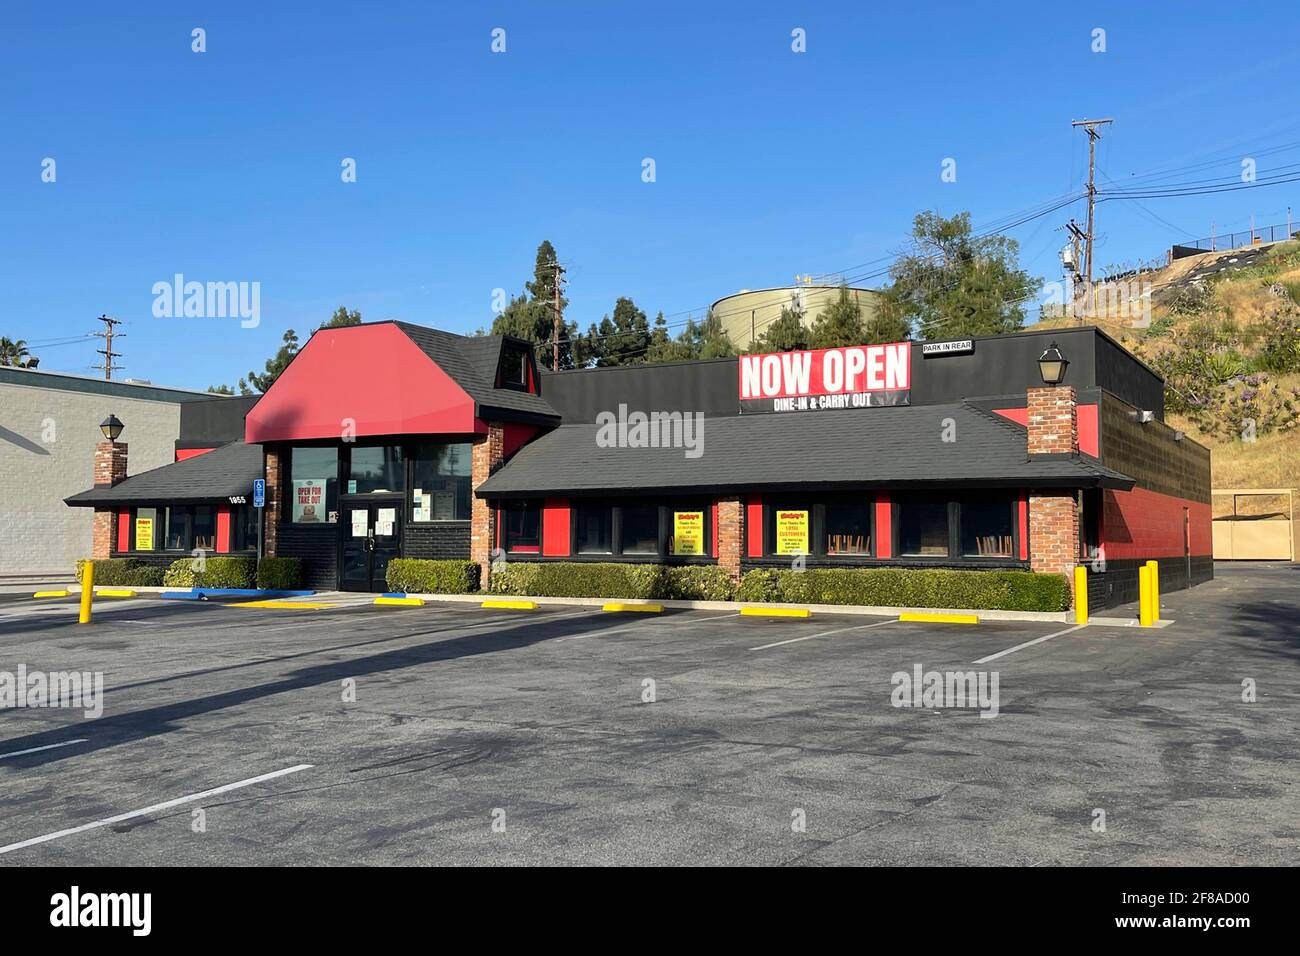 A Now Open for Dine-in and Carry Out in Shakey's Pizza Parlor Restaurant, Freitag, 9. April 2021, in Monterey Park, Kalif. Stockfoto